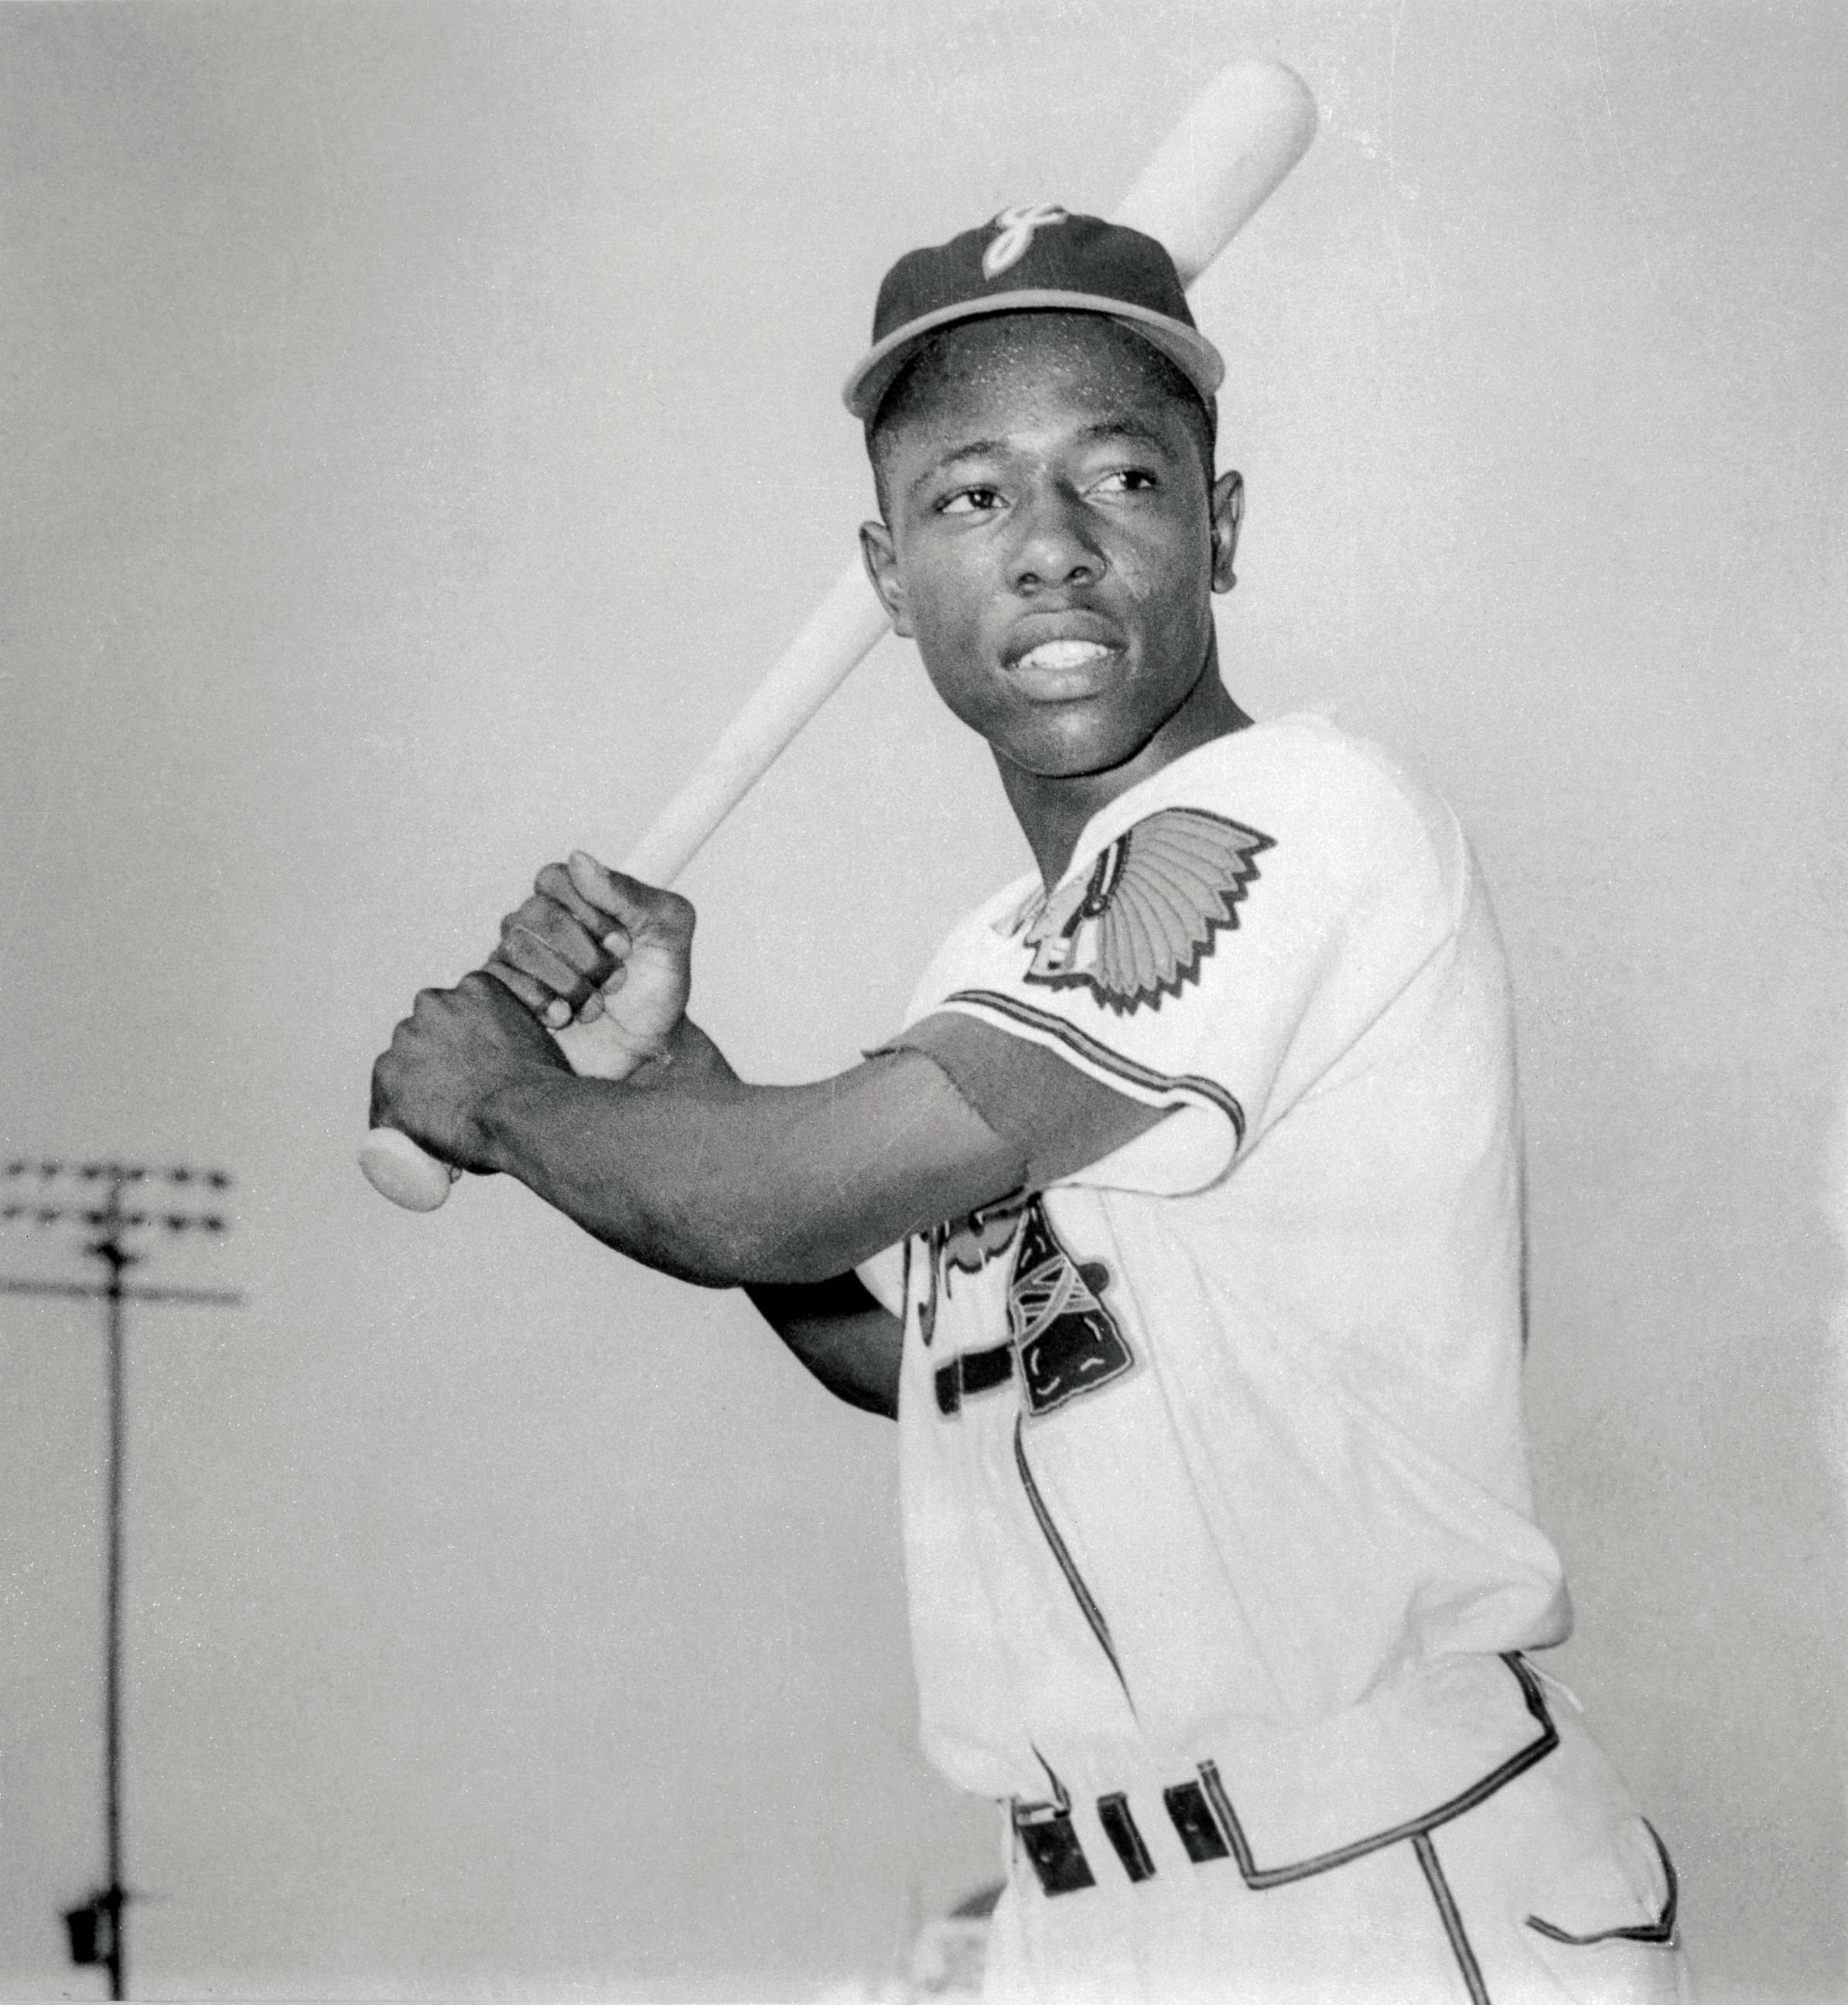 Outfielder Hank Aaron of the Milwaukee Braves looks on during batting  News Photo - Getty Images